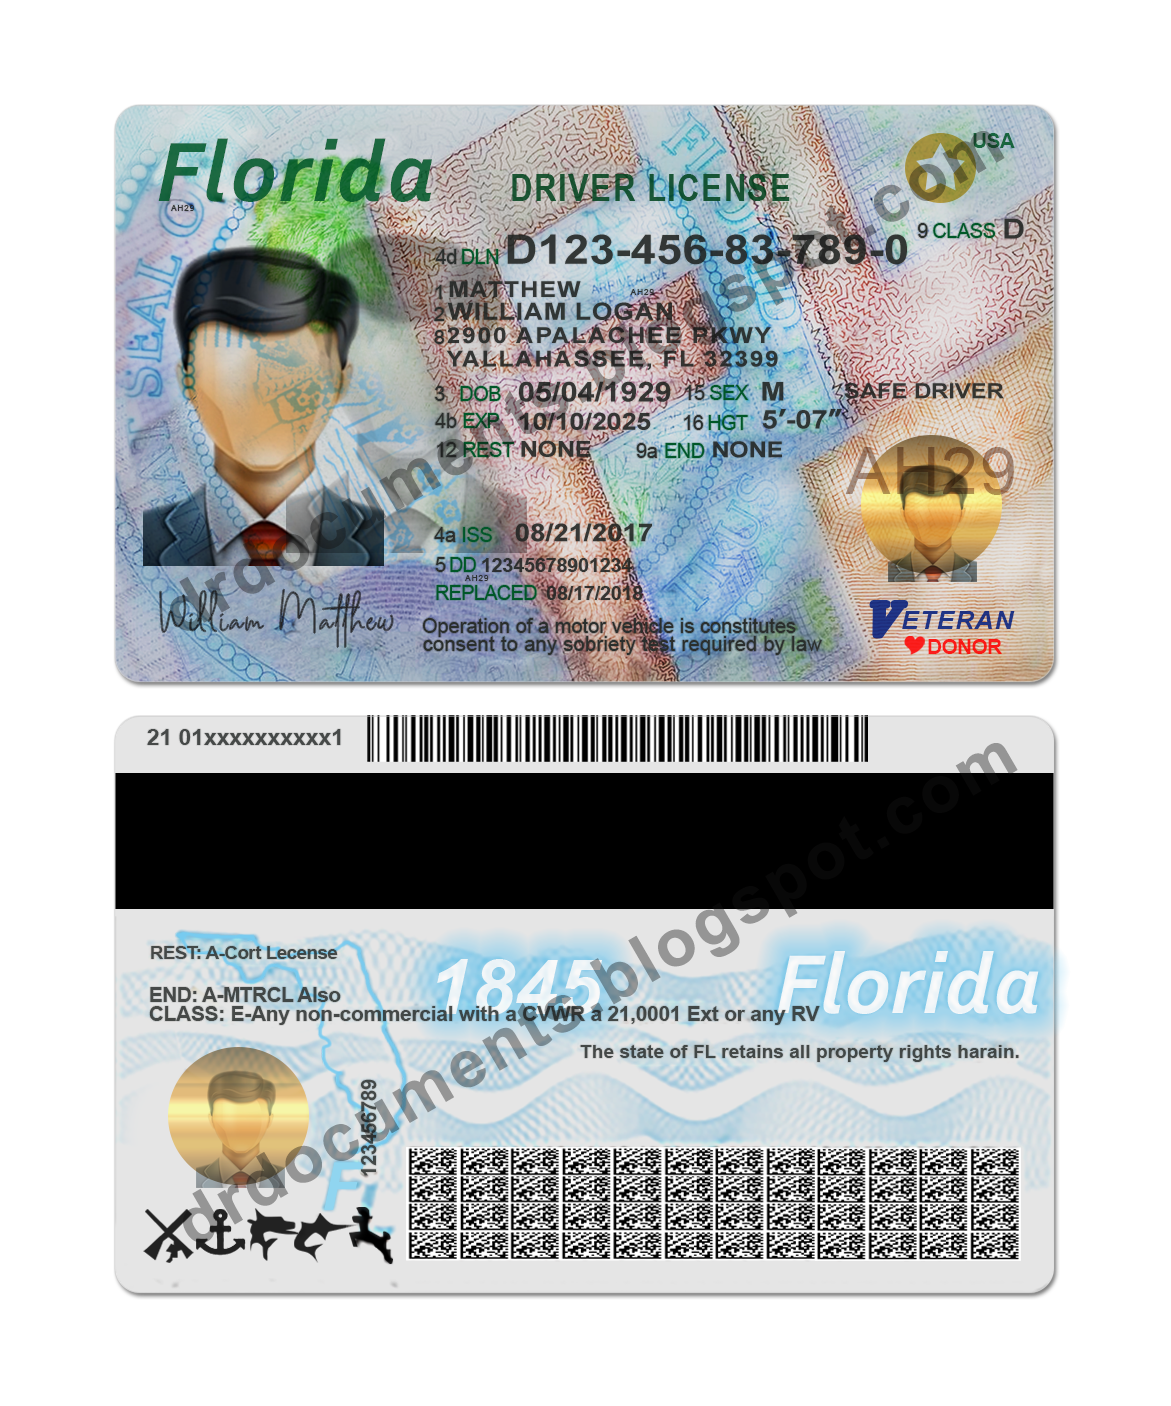 Photoshop drivers license template download - jesvalley